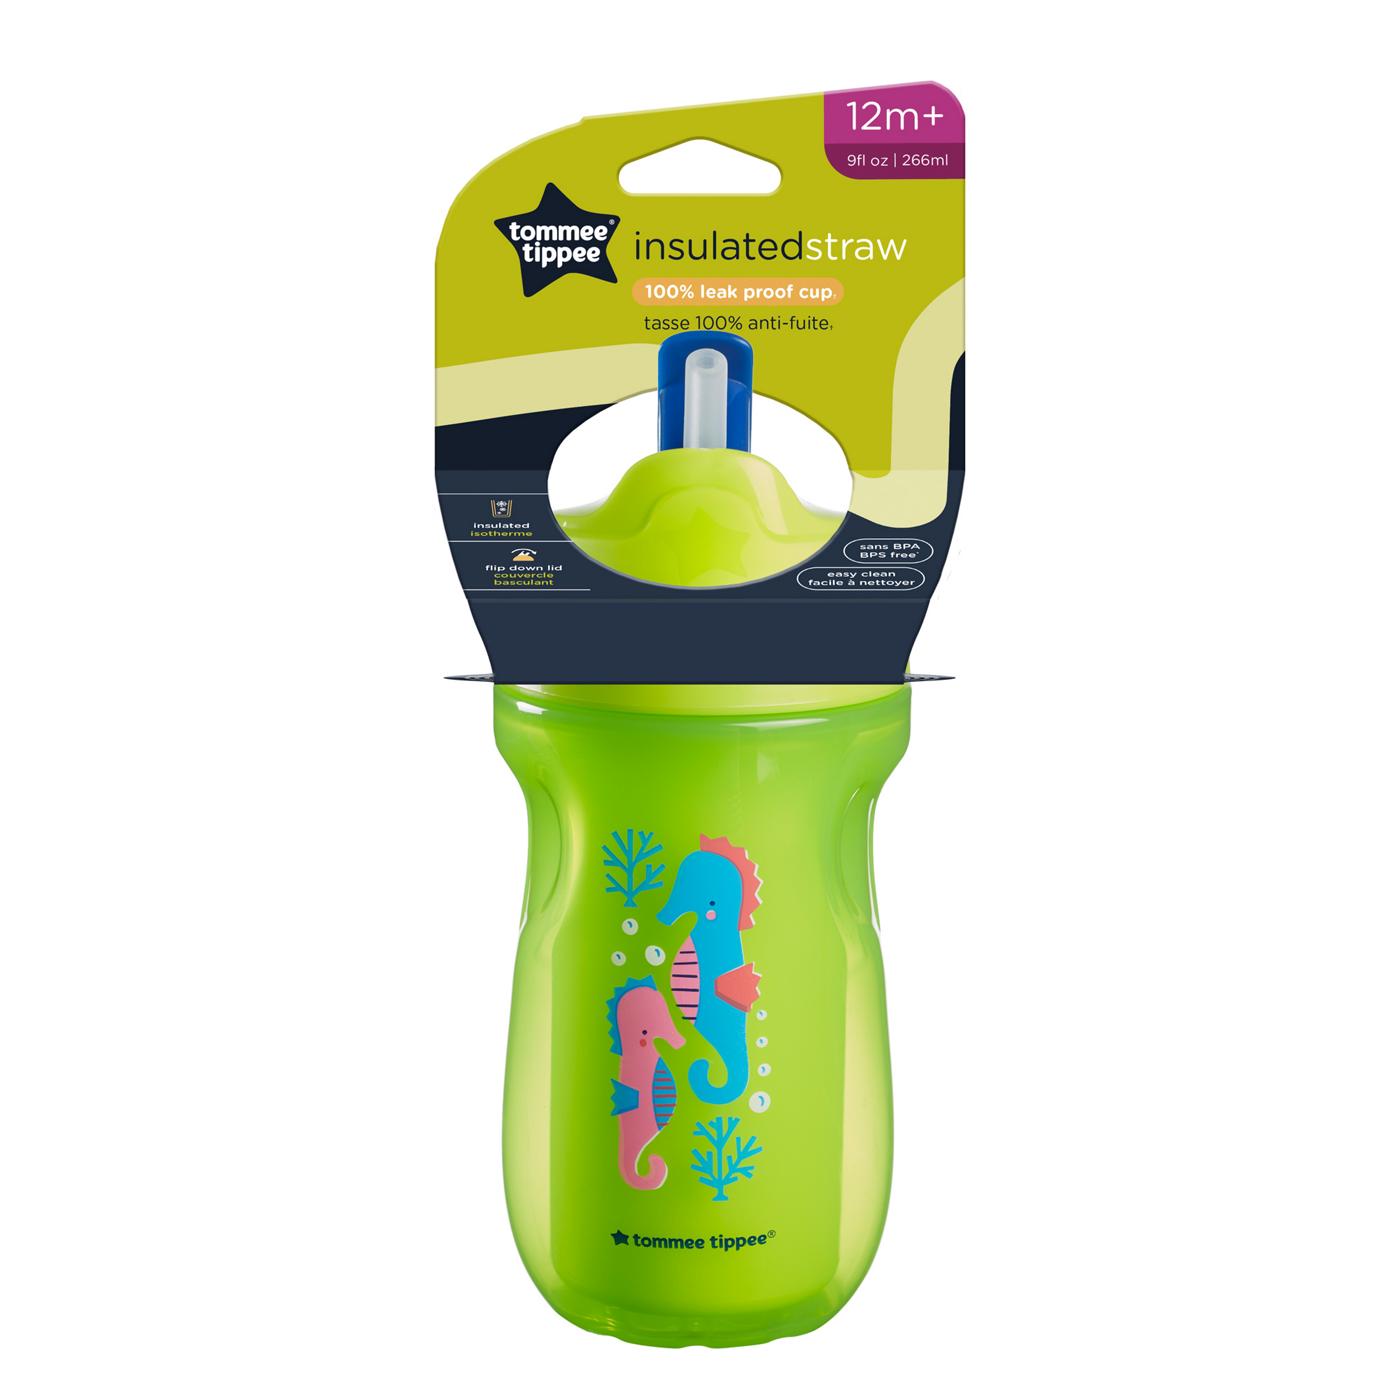 Tommee Tippee Insulated Straw Cup - Assorted Colors; image 4 of 4